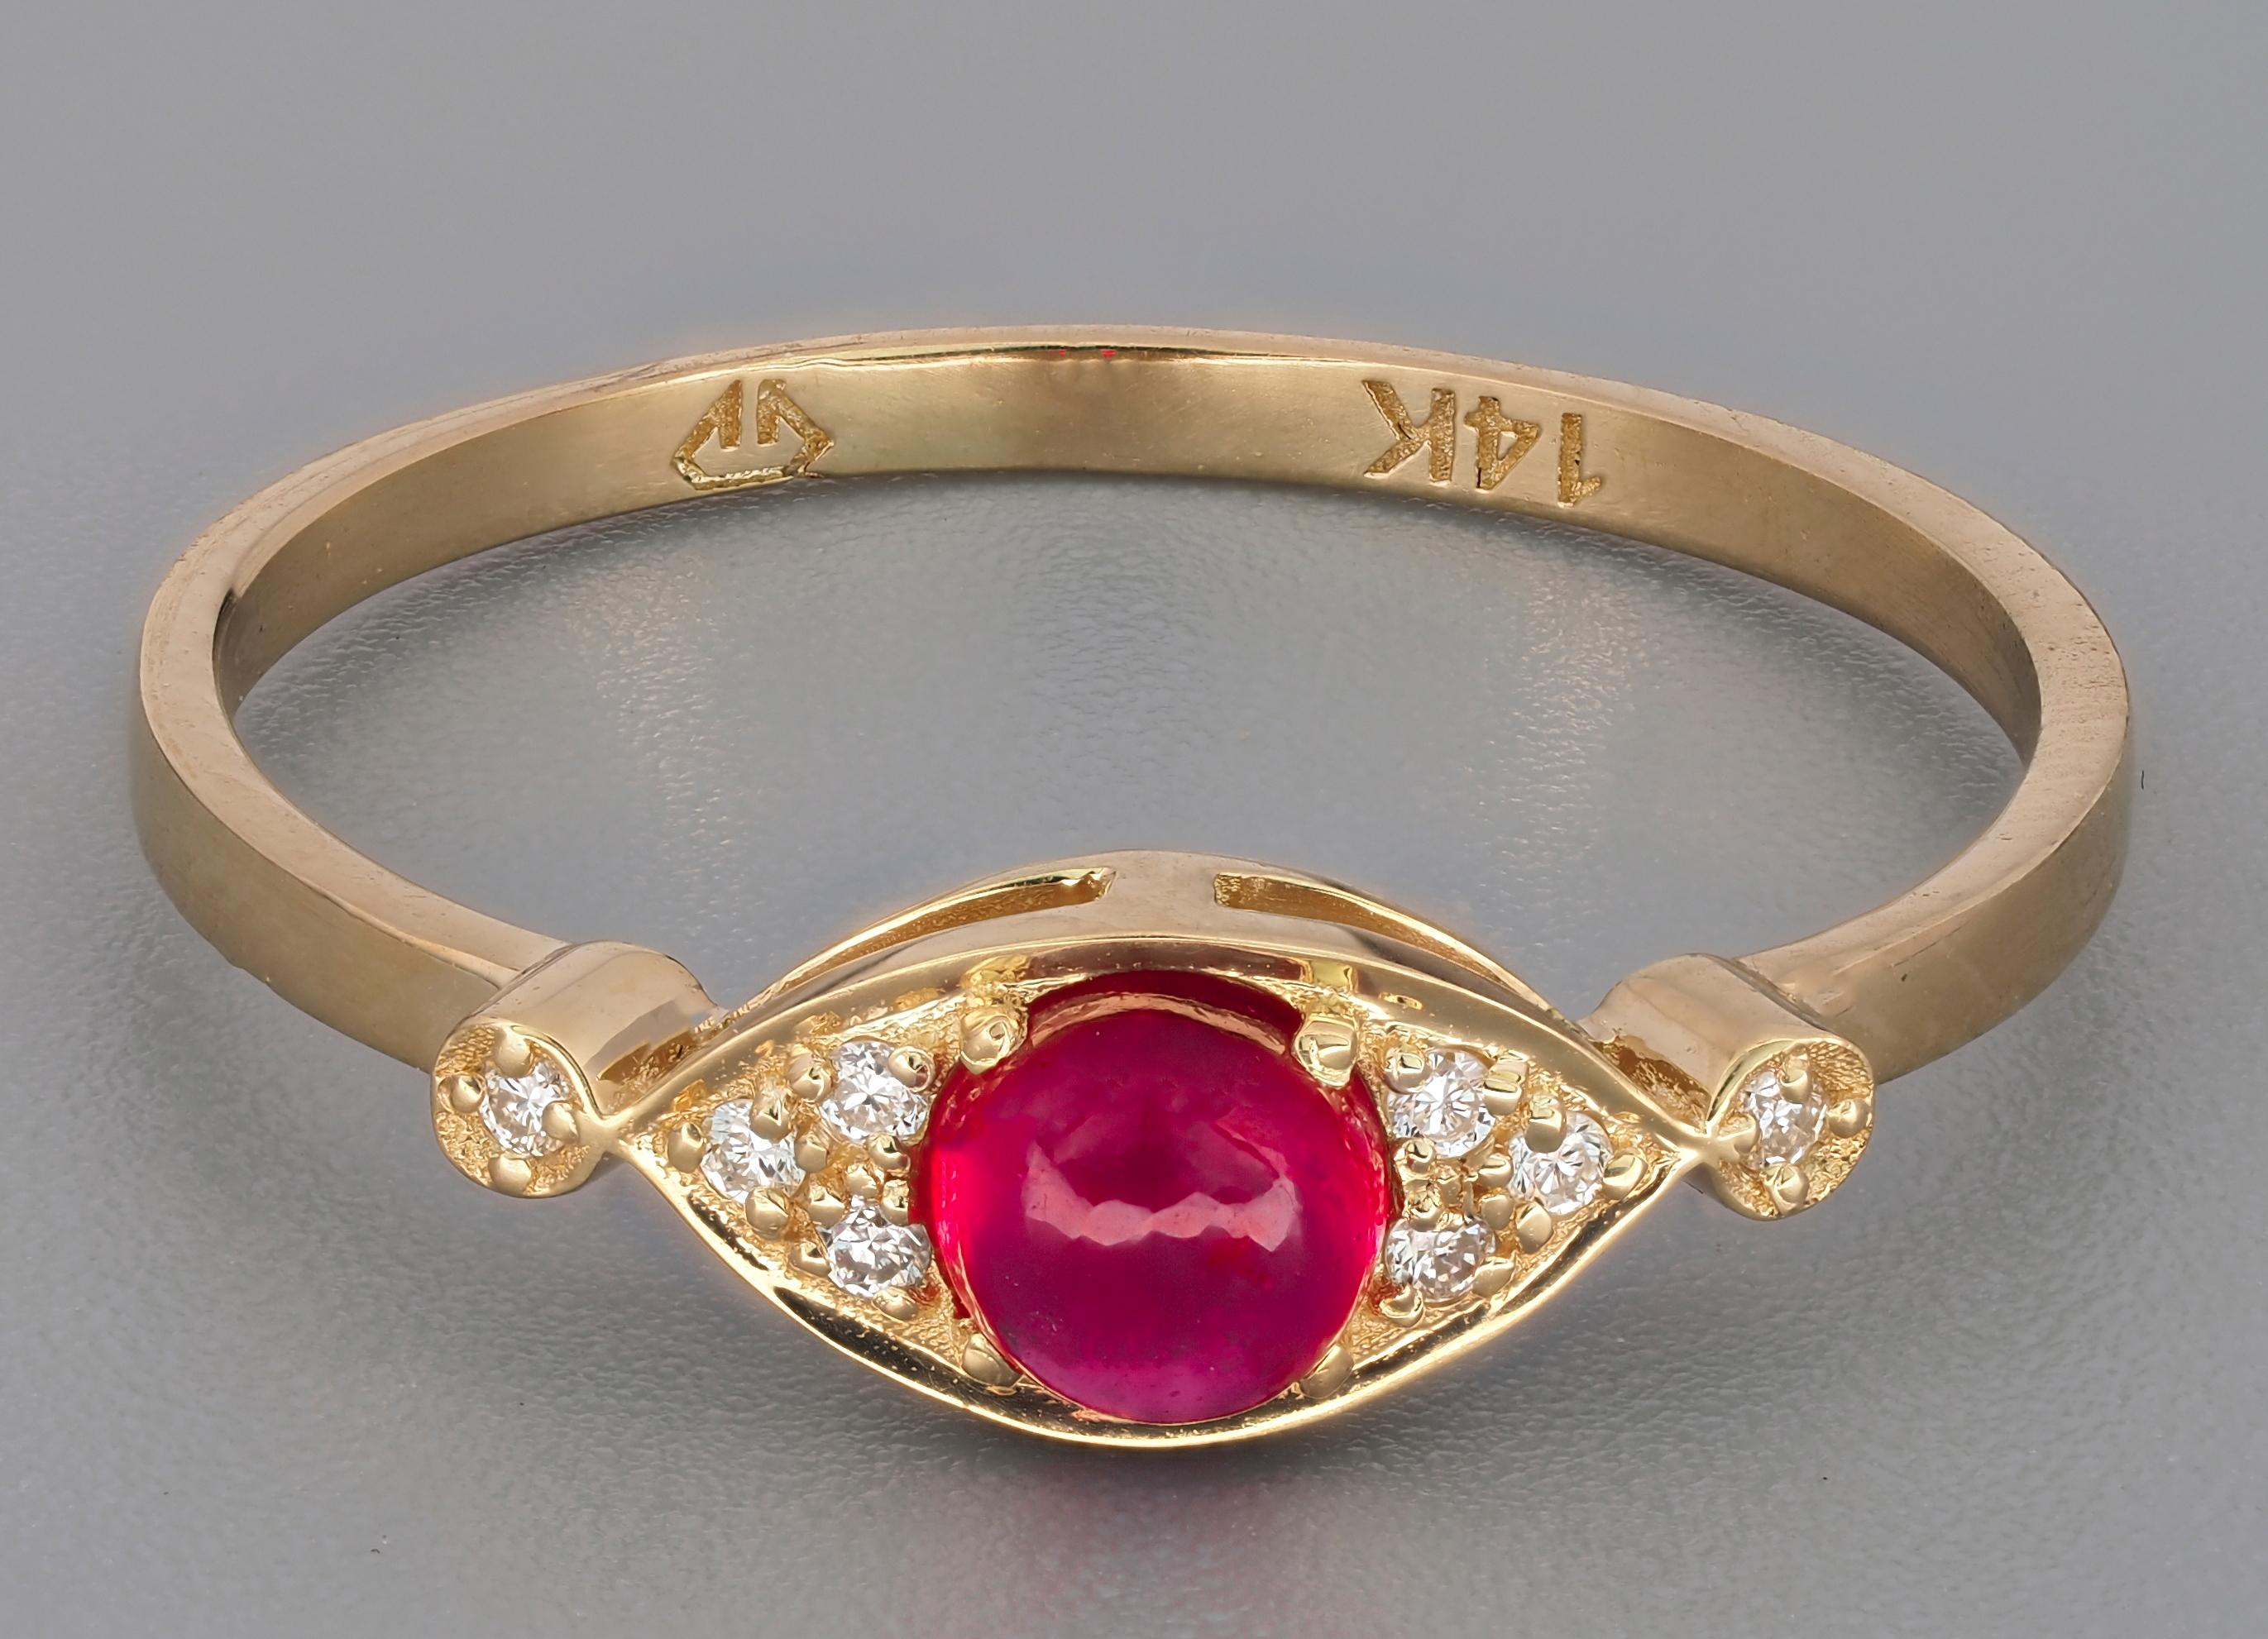 Evil Eye 14k gold Ring. 
Evil Eye ring with ruby, diamonds. Gold Amulette ring. Round ruby ring. July birthstone ring. Evil eye gemstone ring.

Metal: 14k gold
Weight: 1.7 g. depends from size.

Set with natural ruby: round brilliant shape, approx